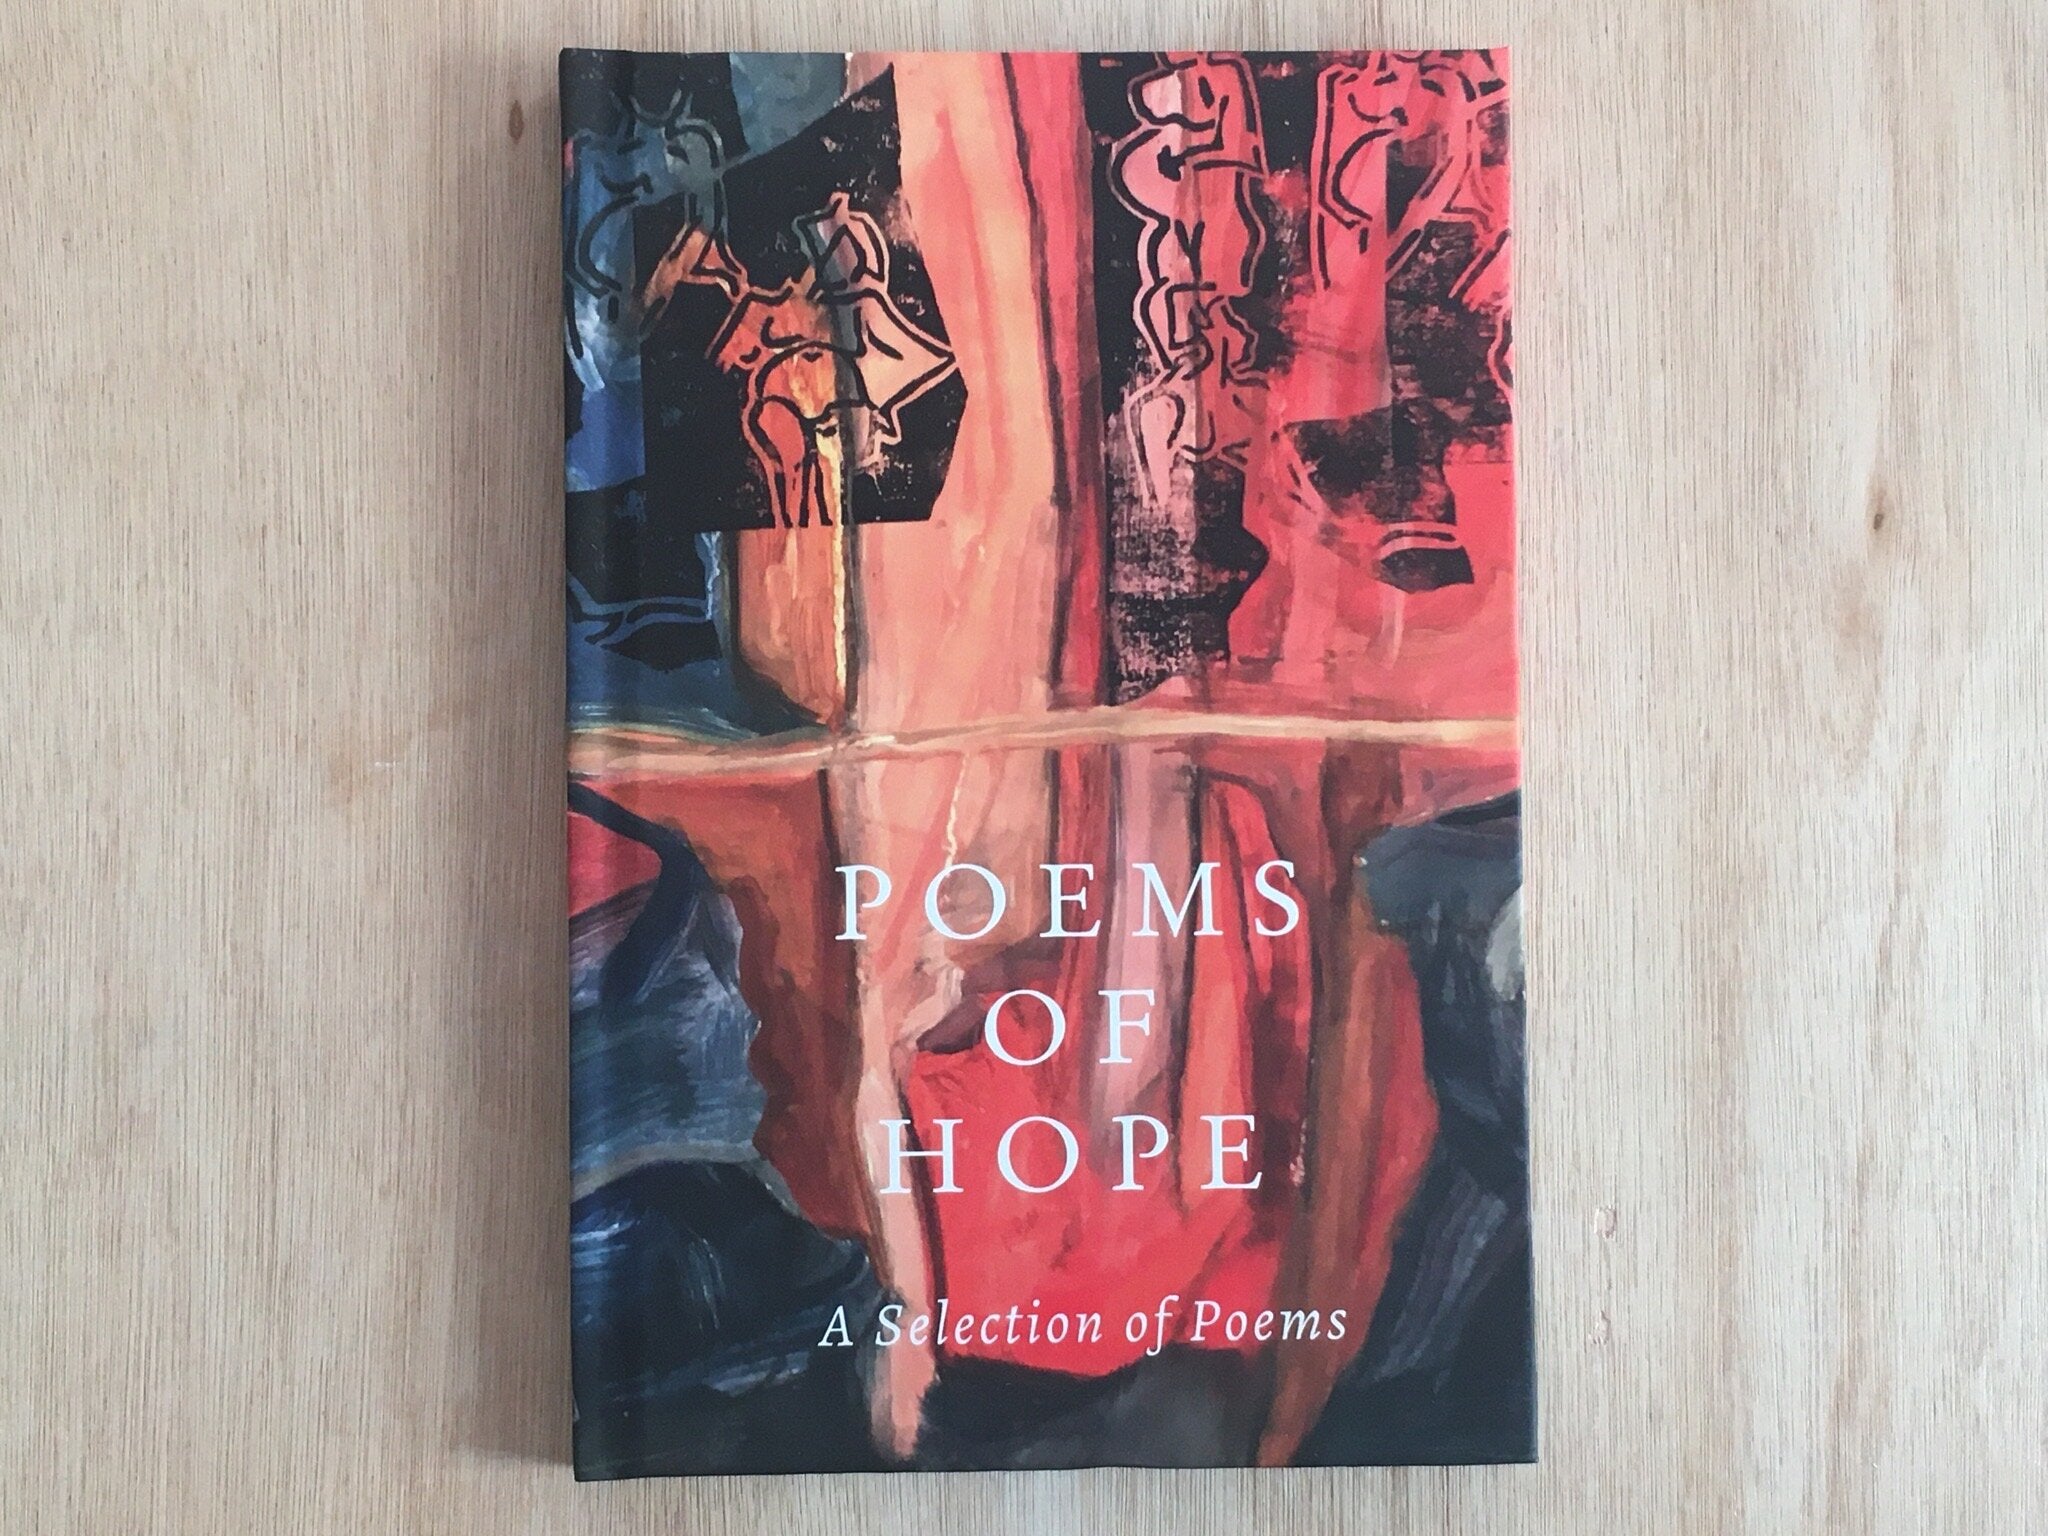 POEMS OF HOPE by Jessica Clark and Stephanie Hanson